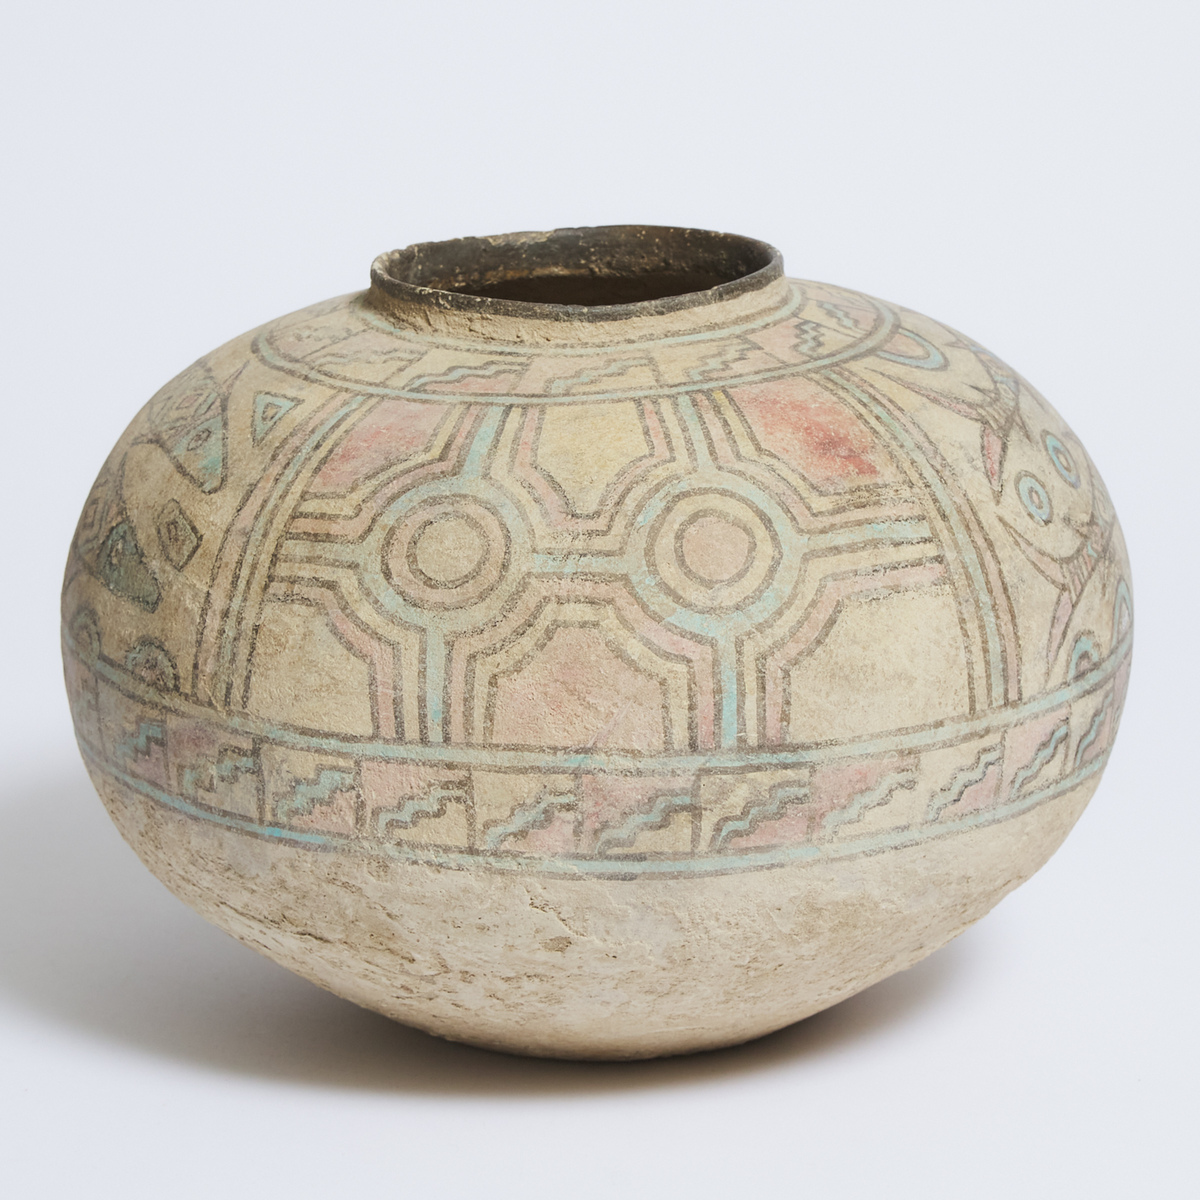 Indus Valley Civilization Polychromed Pottery Jar, Mehrgarh, 2600-2000 BC, height 8.6 in — 21.8 cm, - Image 4 of 4